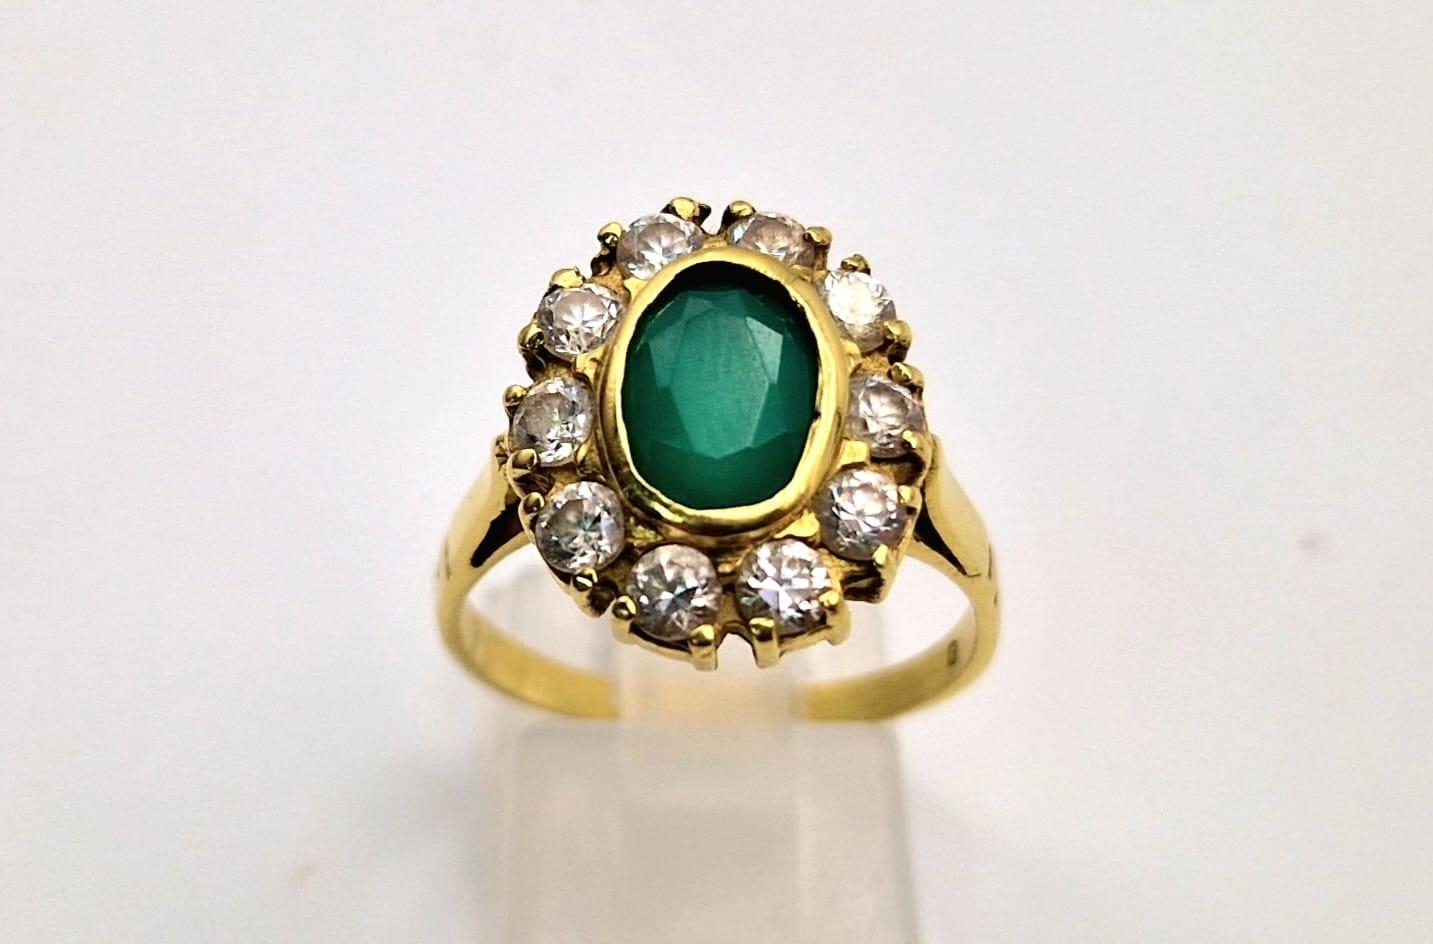 An 18 K yellow gold, stone set cluster ring. Size: Q, weight: 5.6 g. - Image 2 of 7